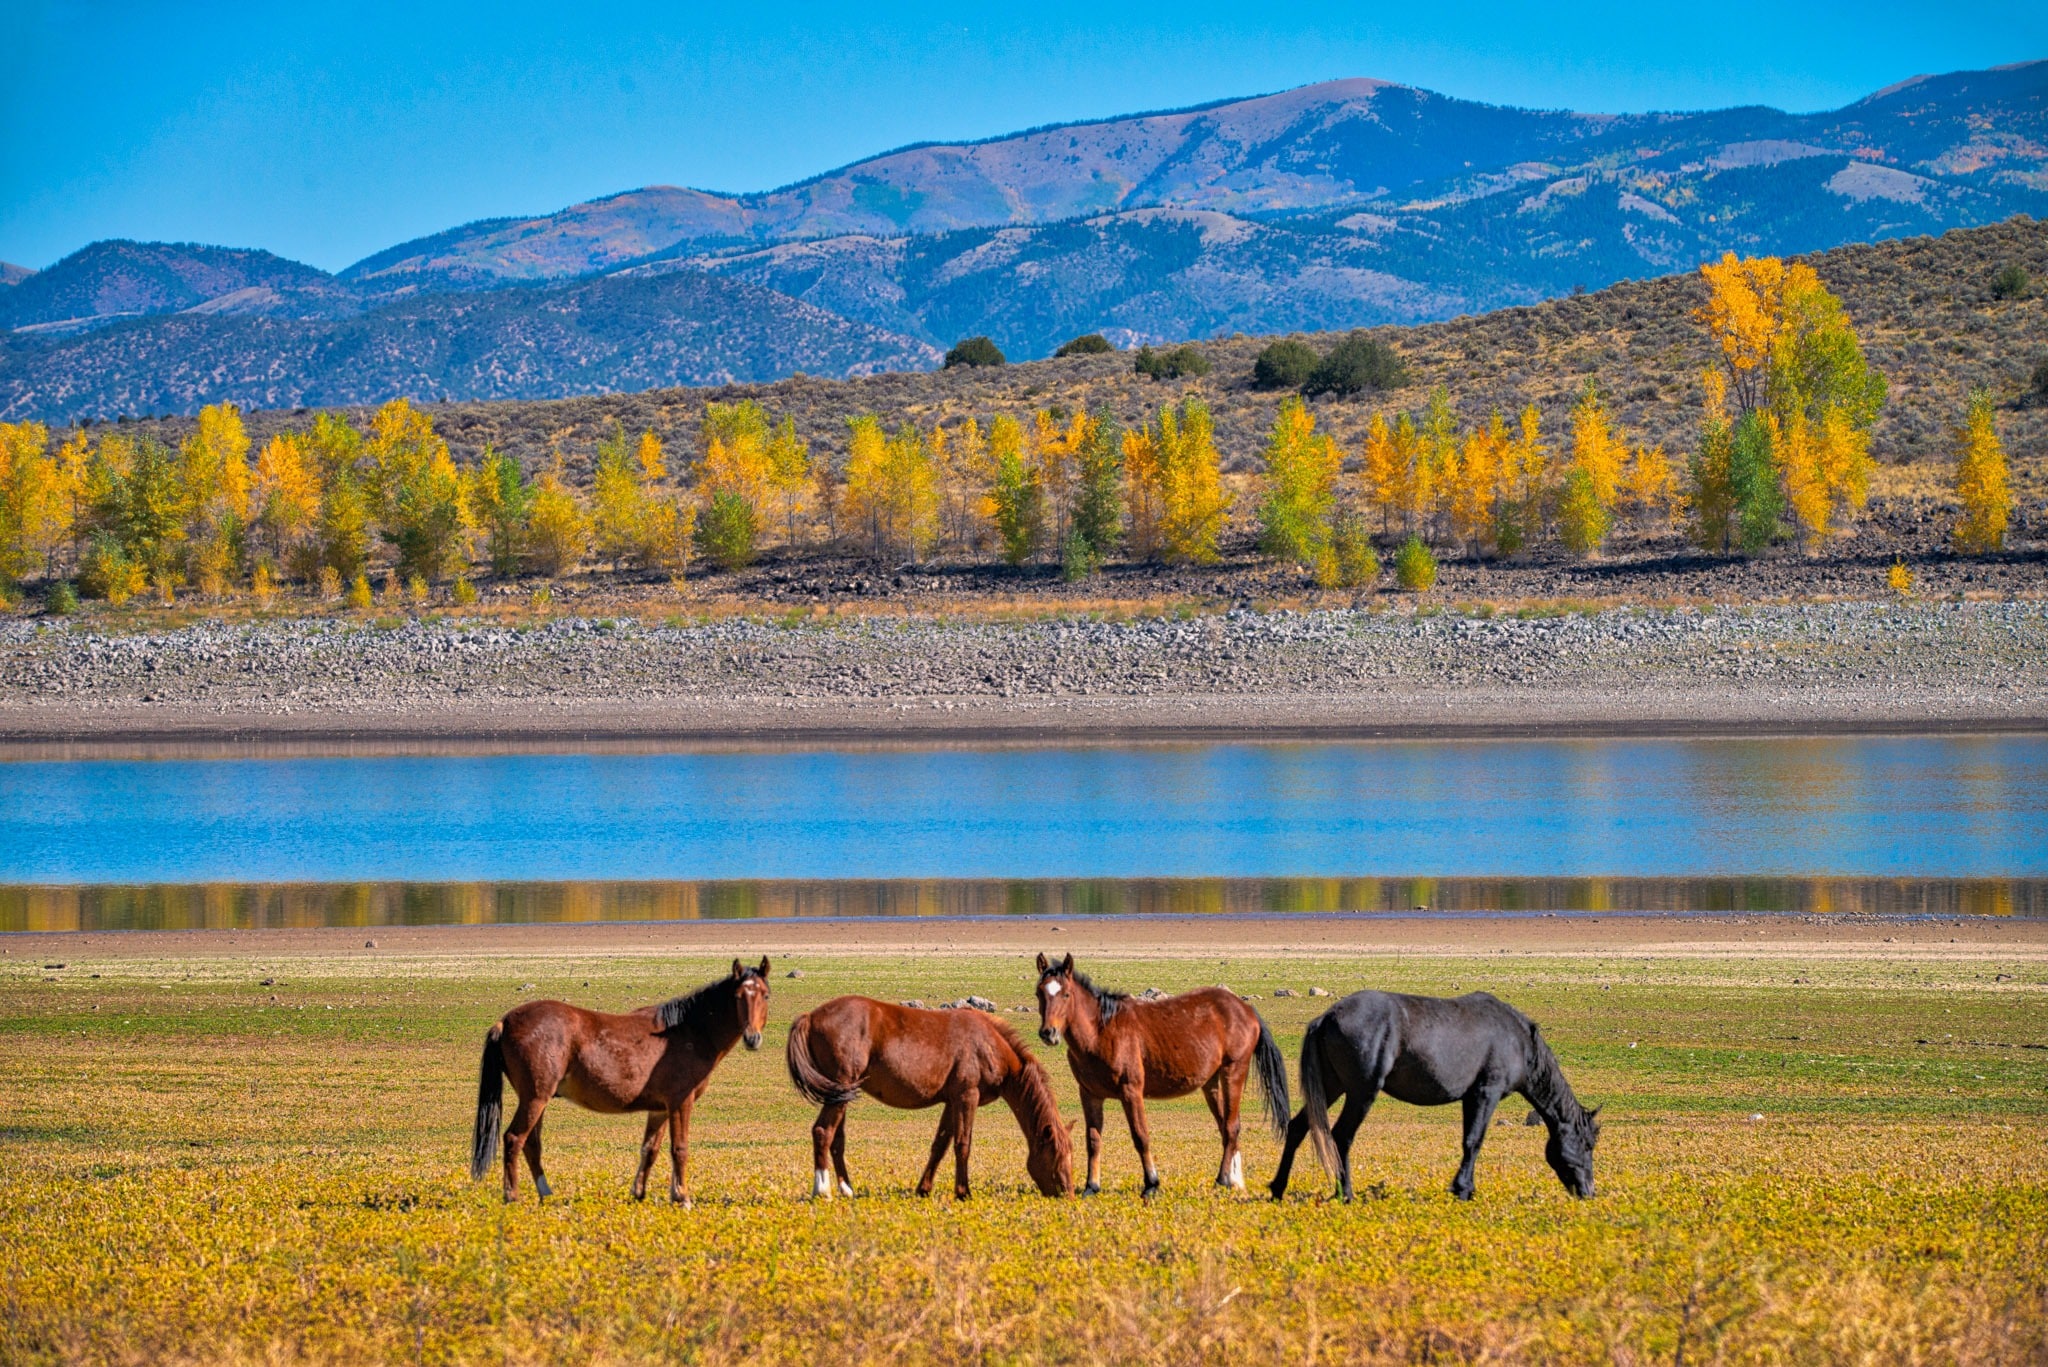 These wild horses are grazing along the Sanchez Reservoir on San Pedro Mesain the San Luis Valley of Colorado.